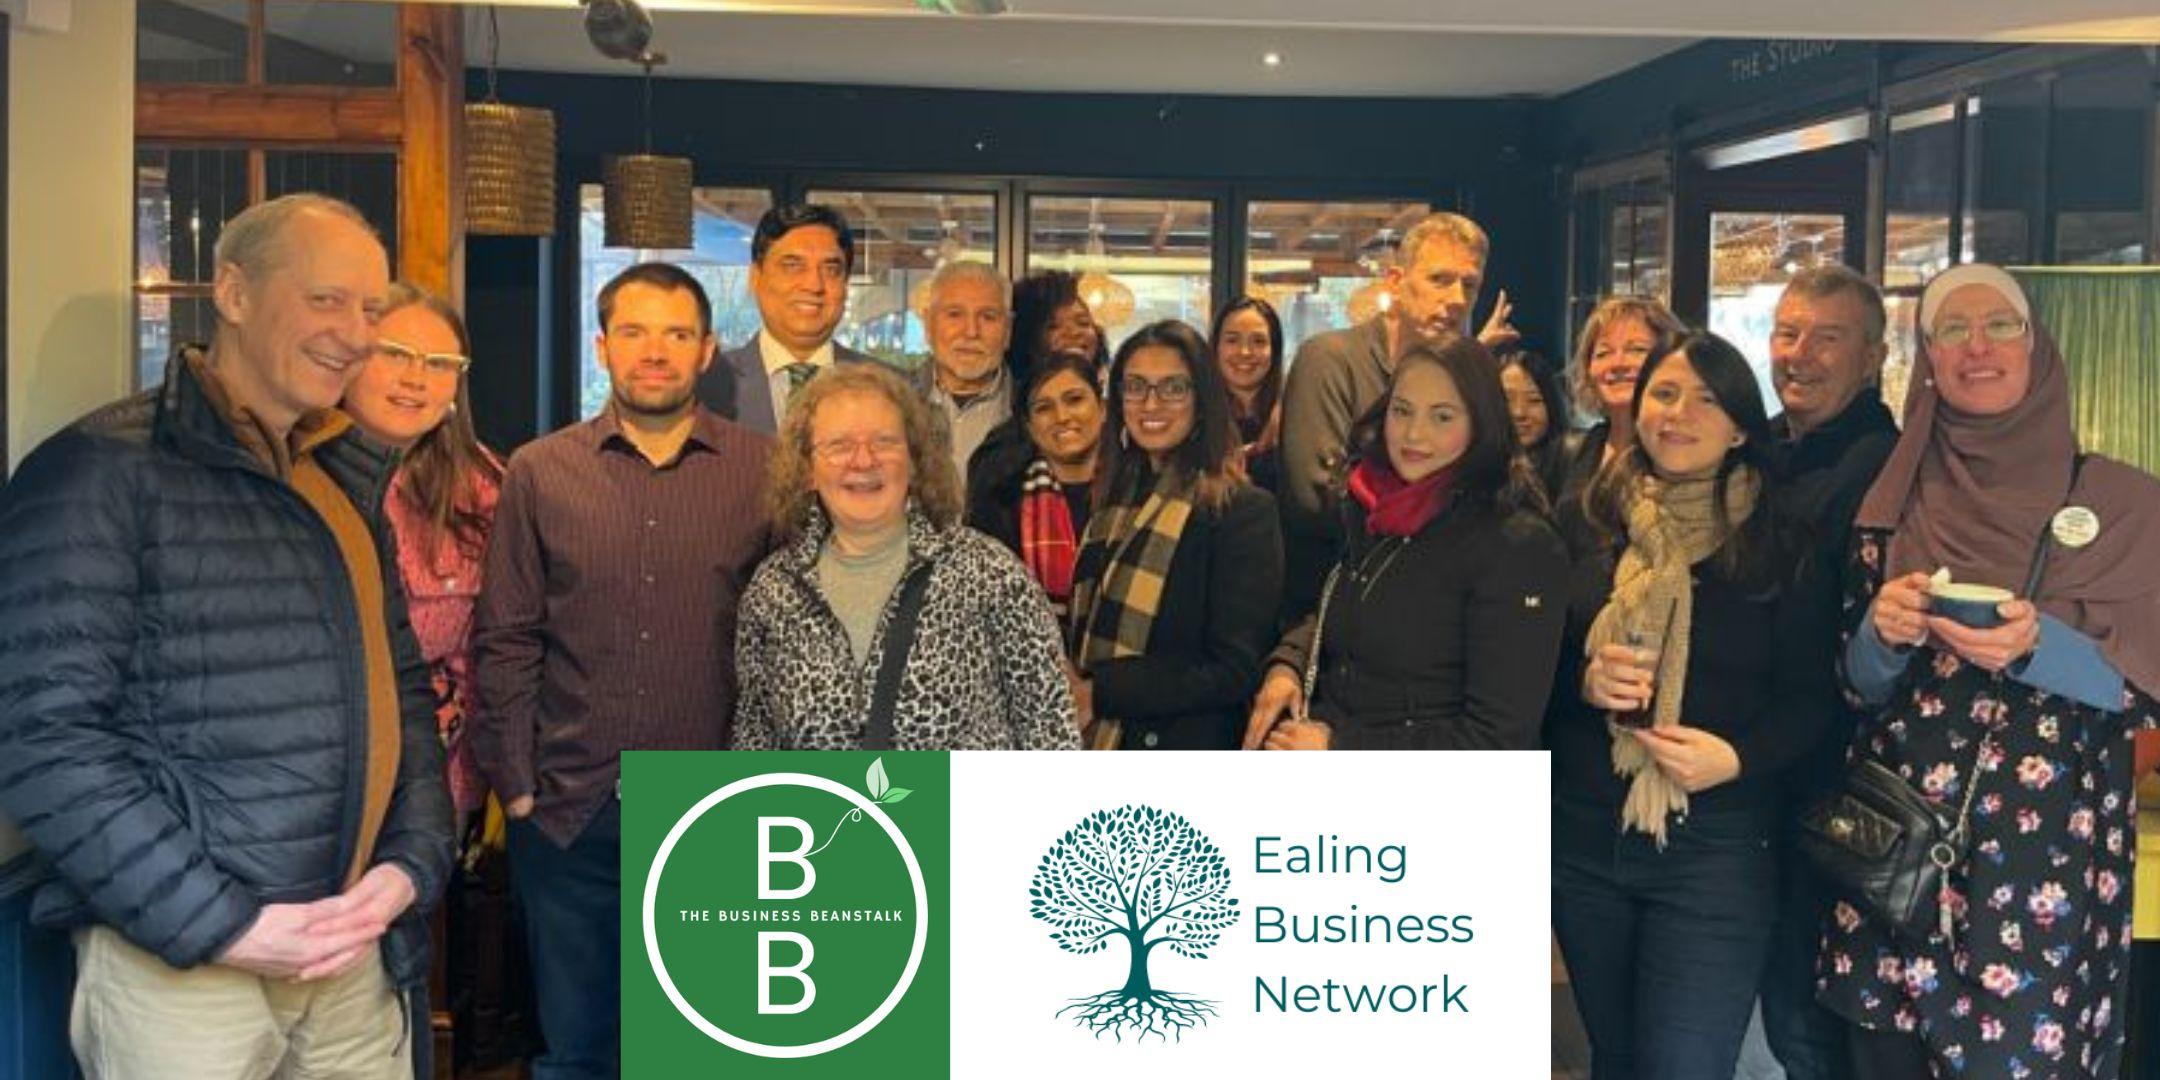 The Business Beanstalk & Ealing Business Network - Happy Hour networking 1